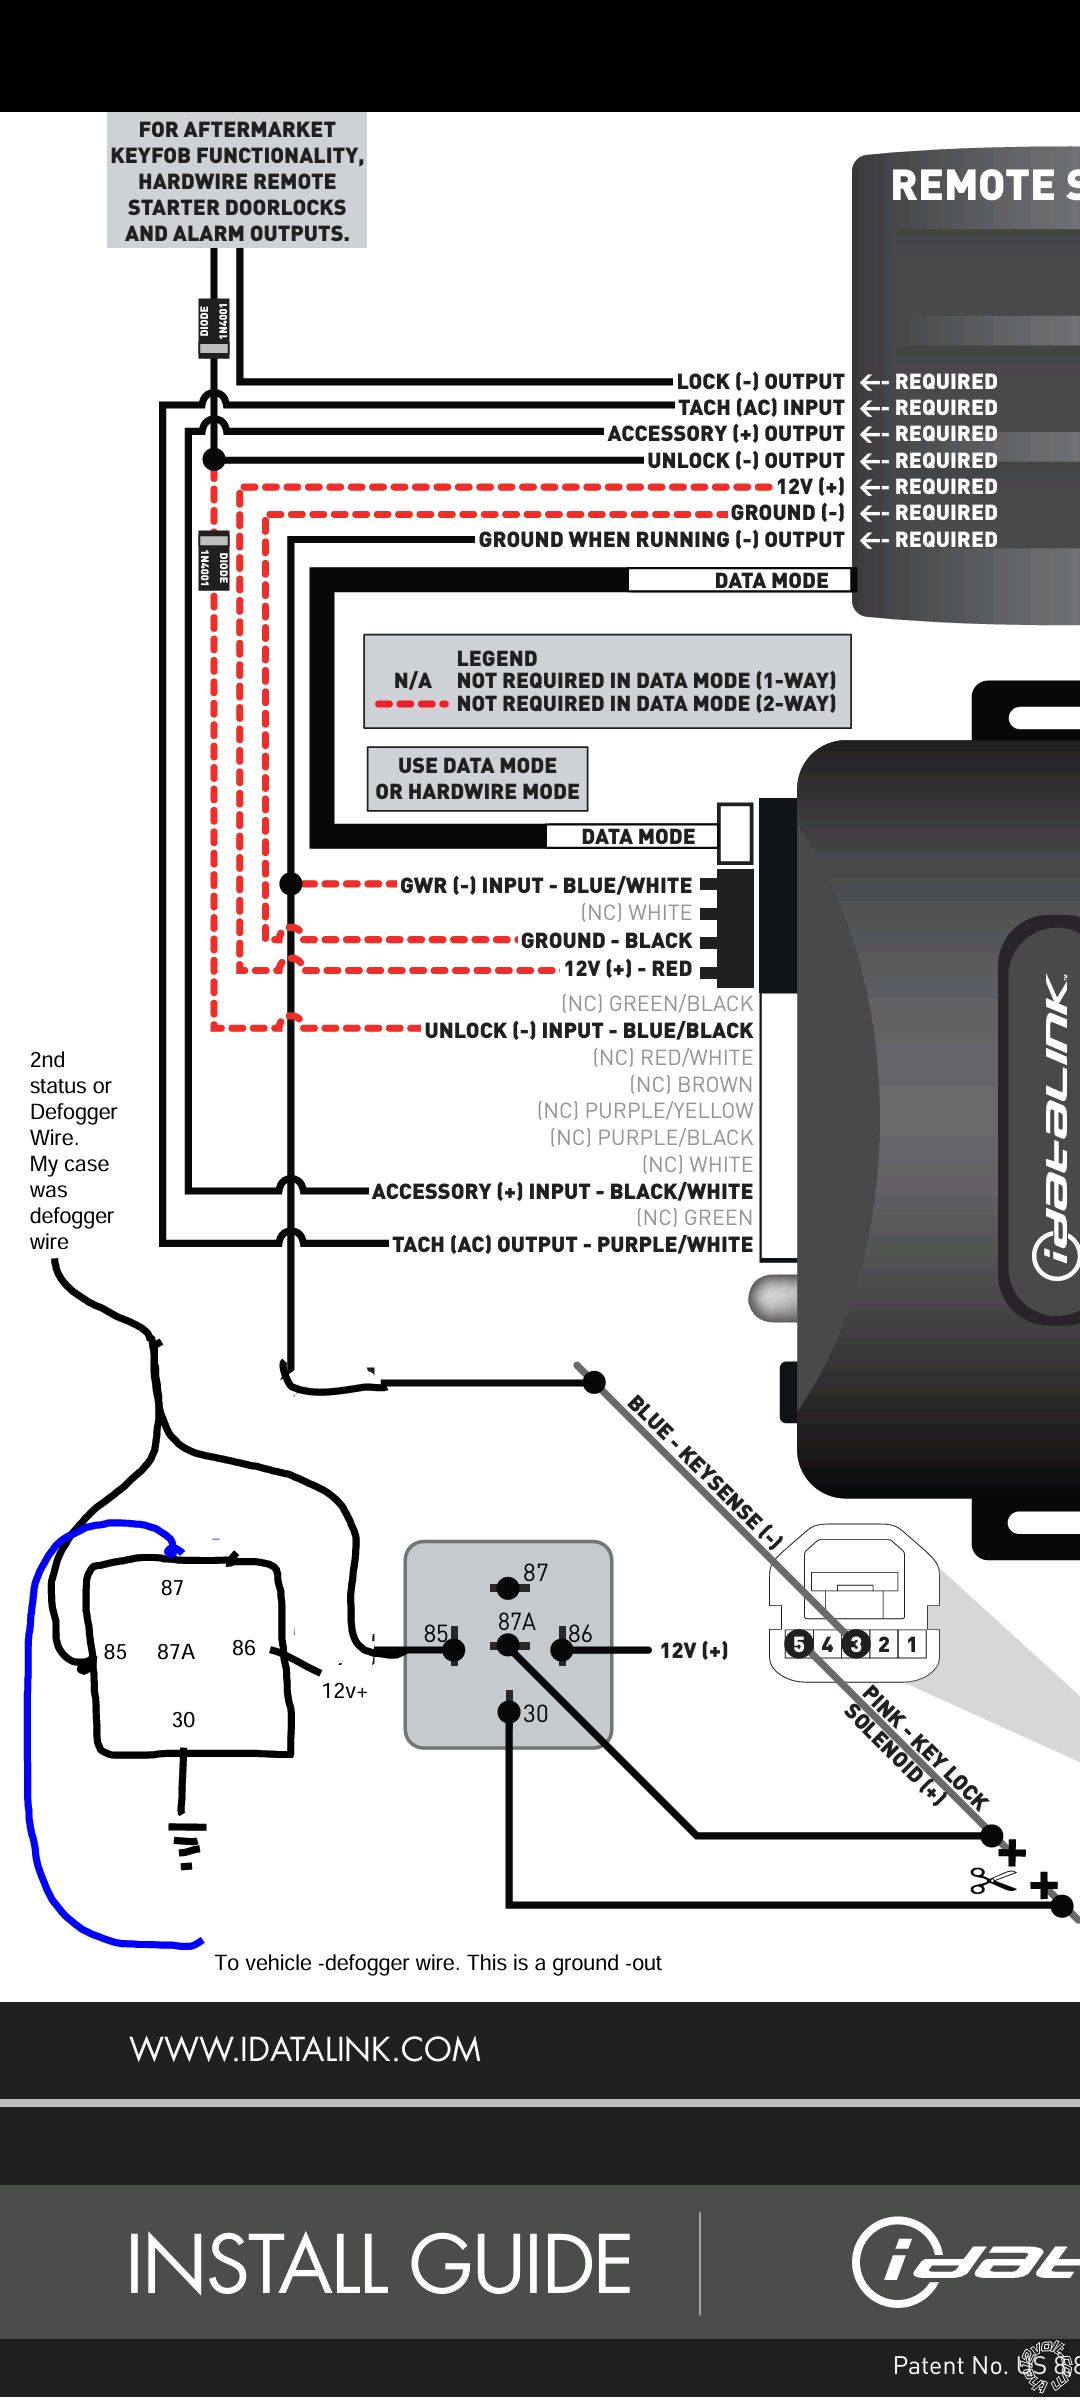 2005 Toyota Prius, Viper 4105v - Page 2 -- posted image.